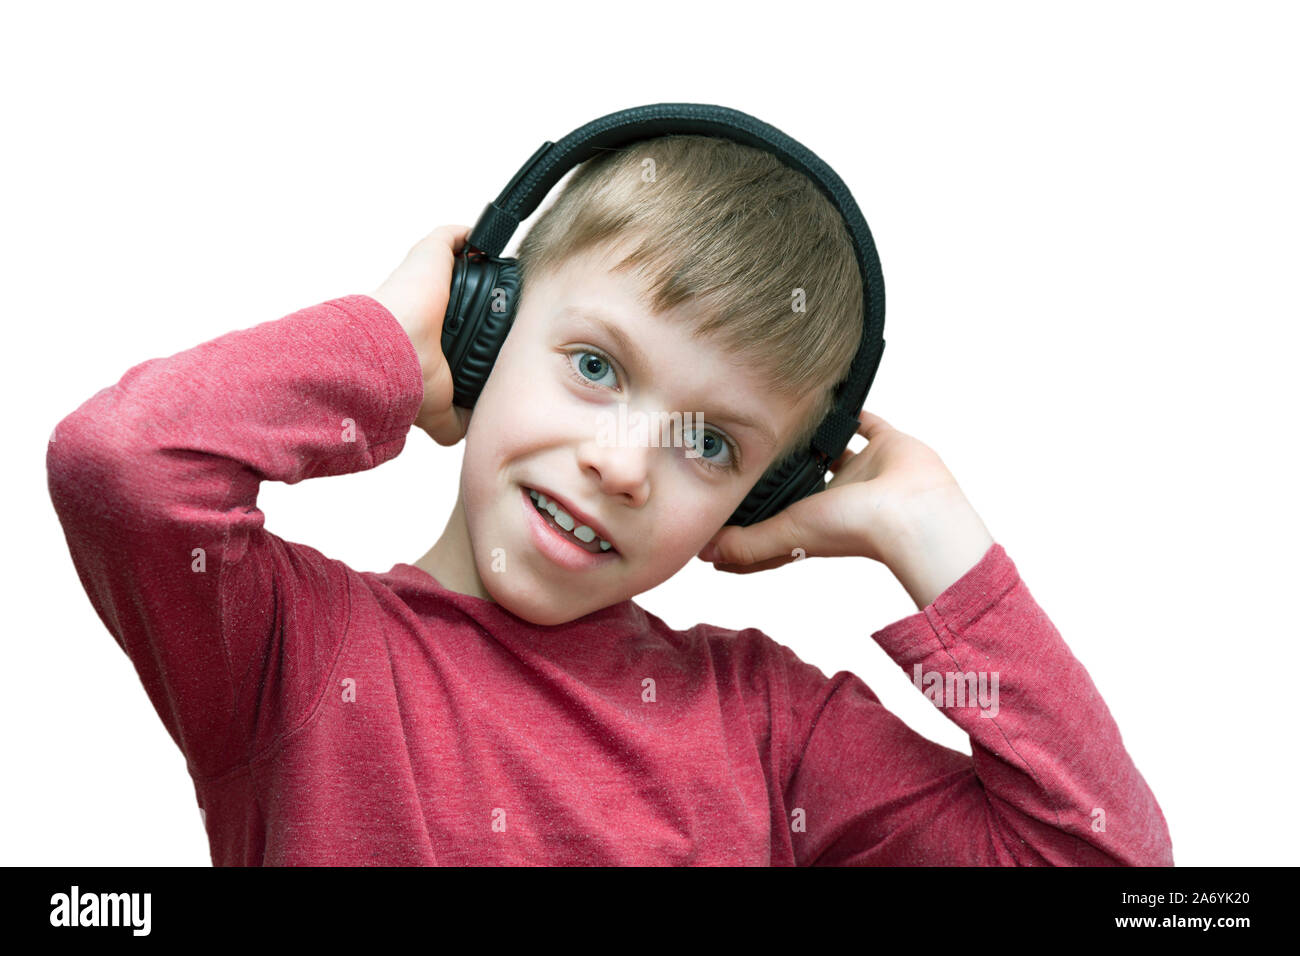 seven year old boy with headphones singing on white background Stock Photo